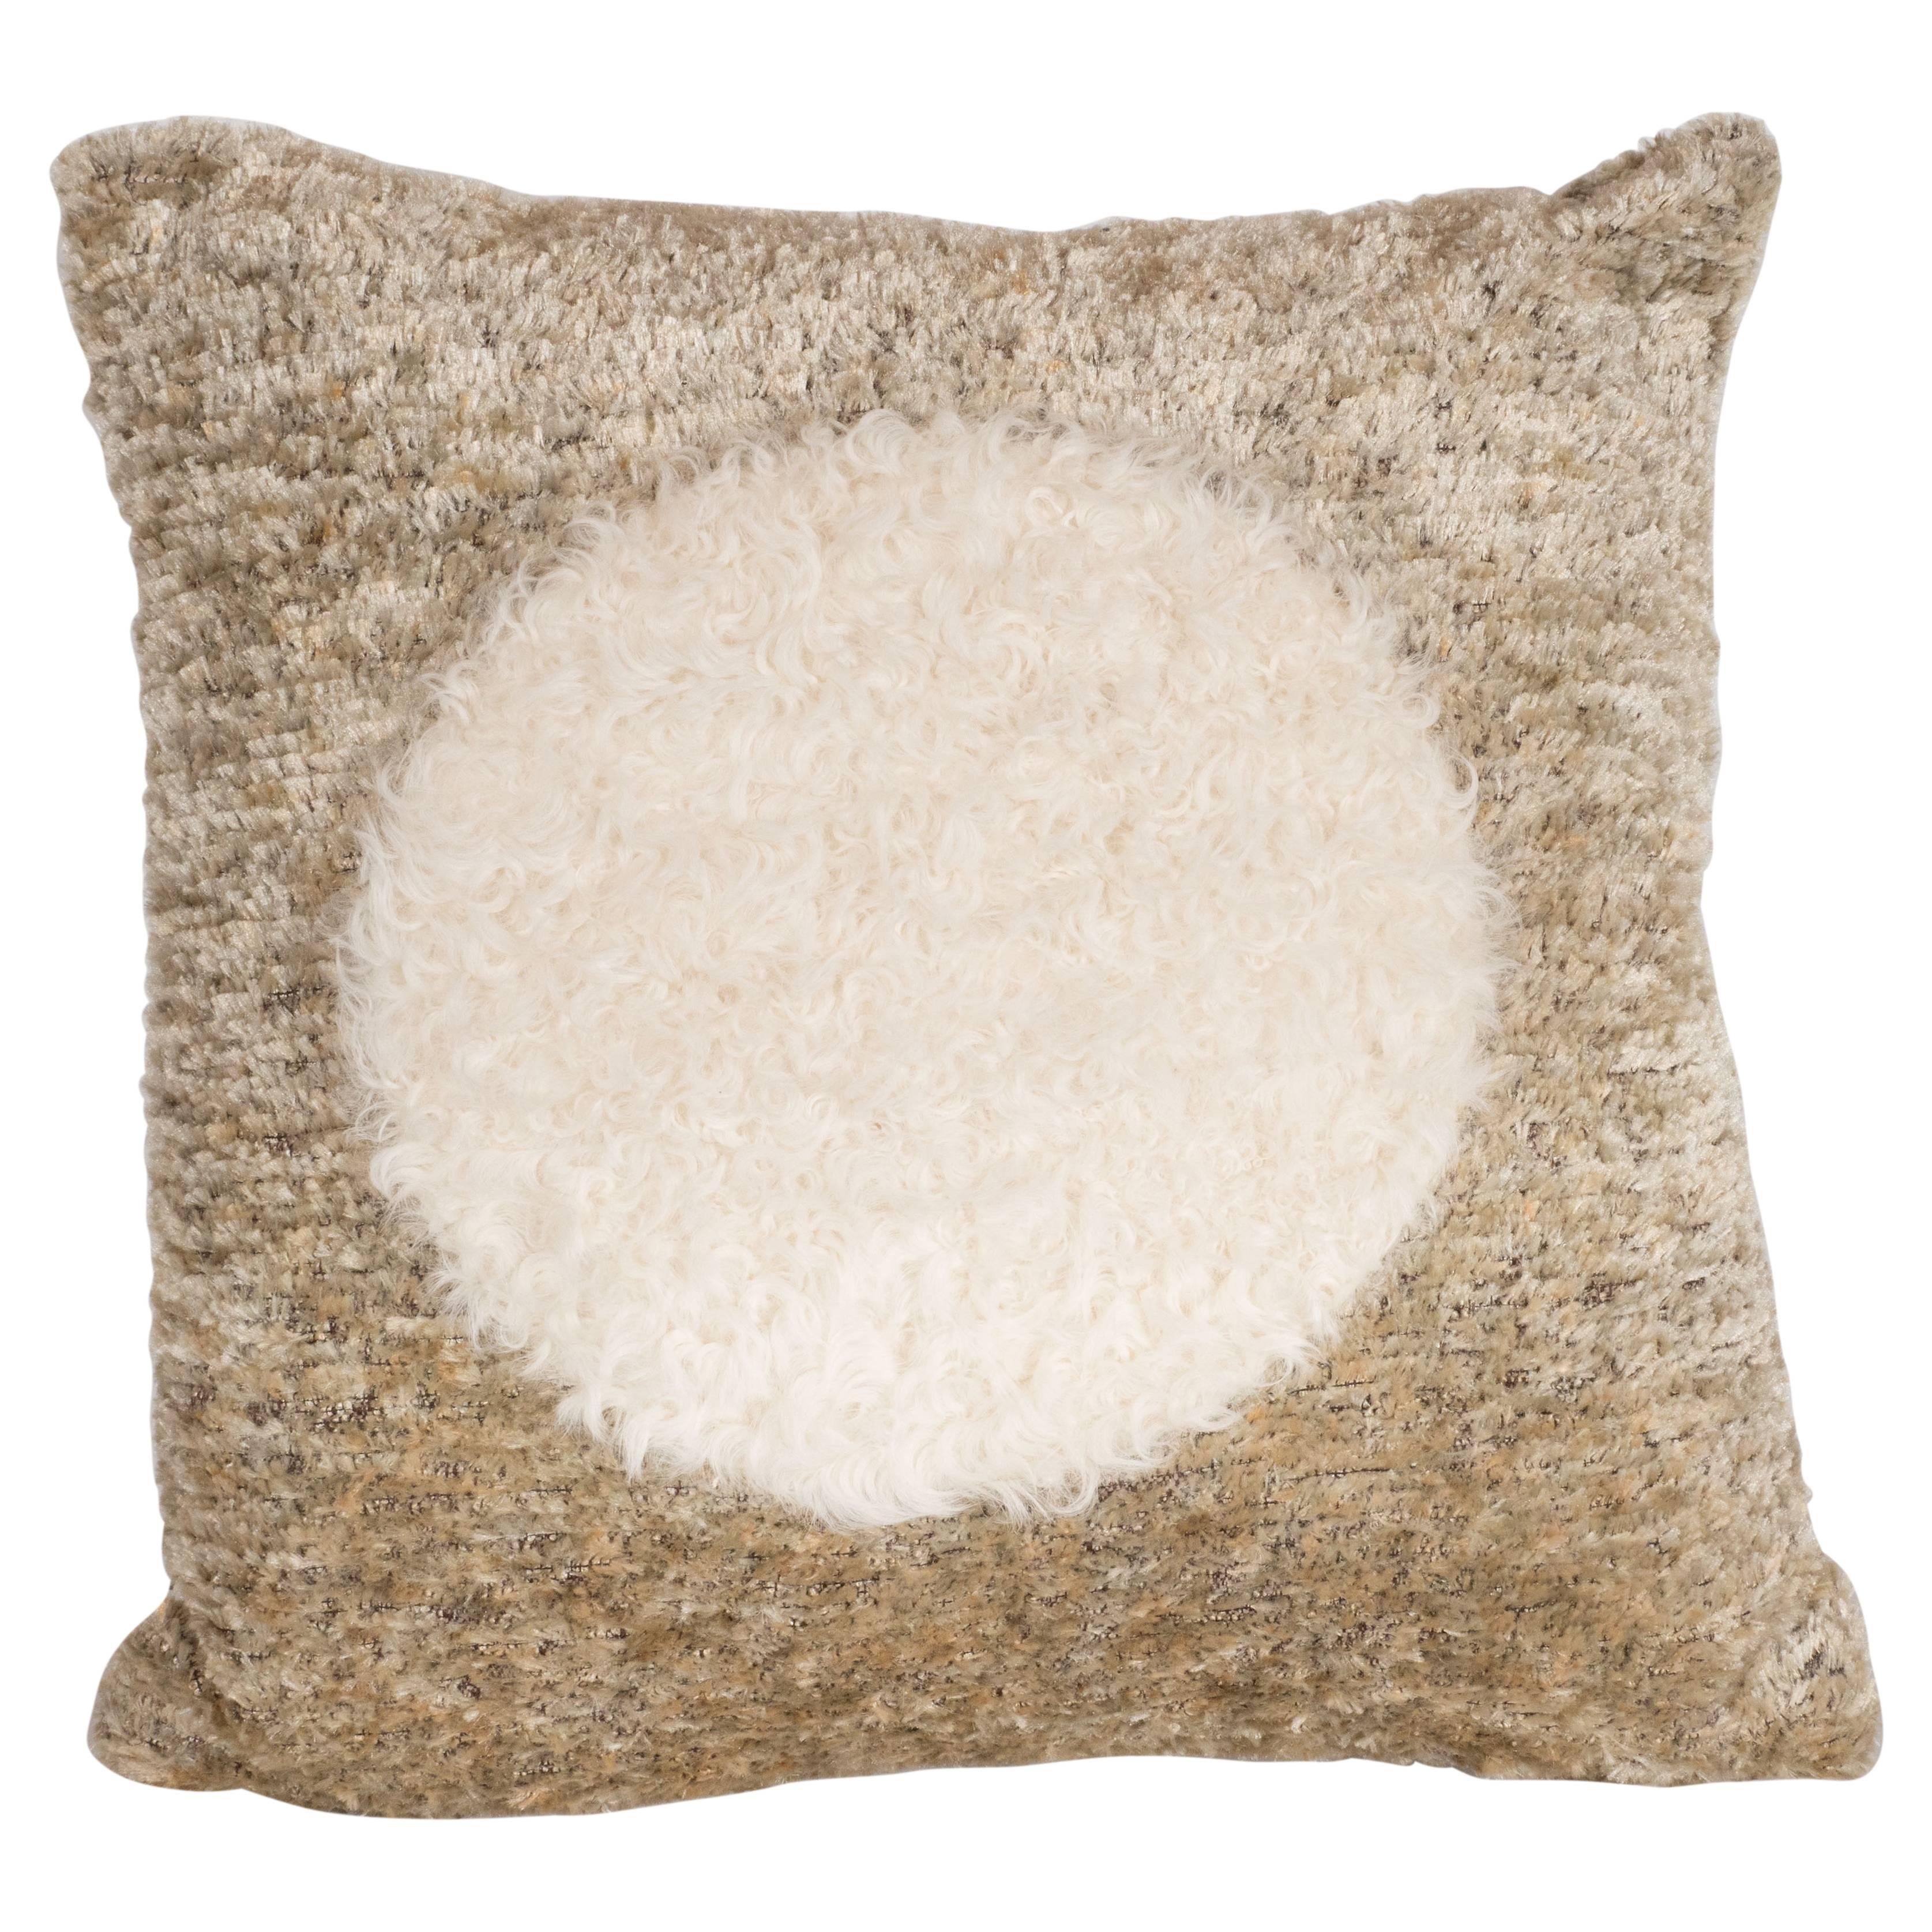 Custom Designed Champagne Colored Pillow with White Mongolian Lambswool Circle